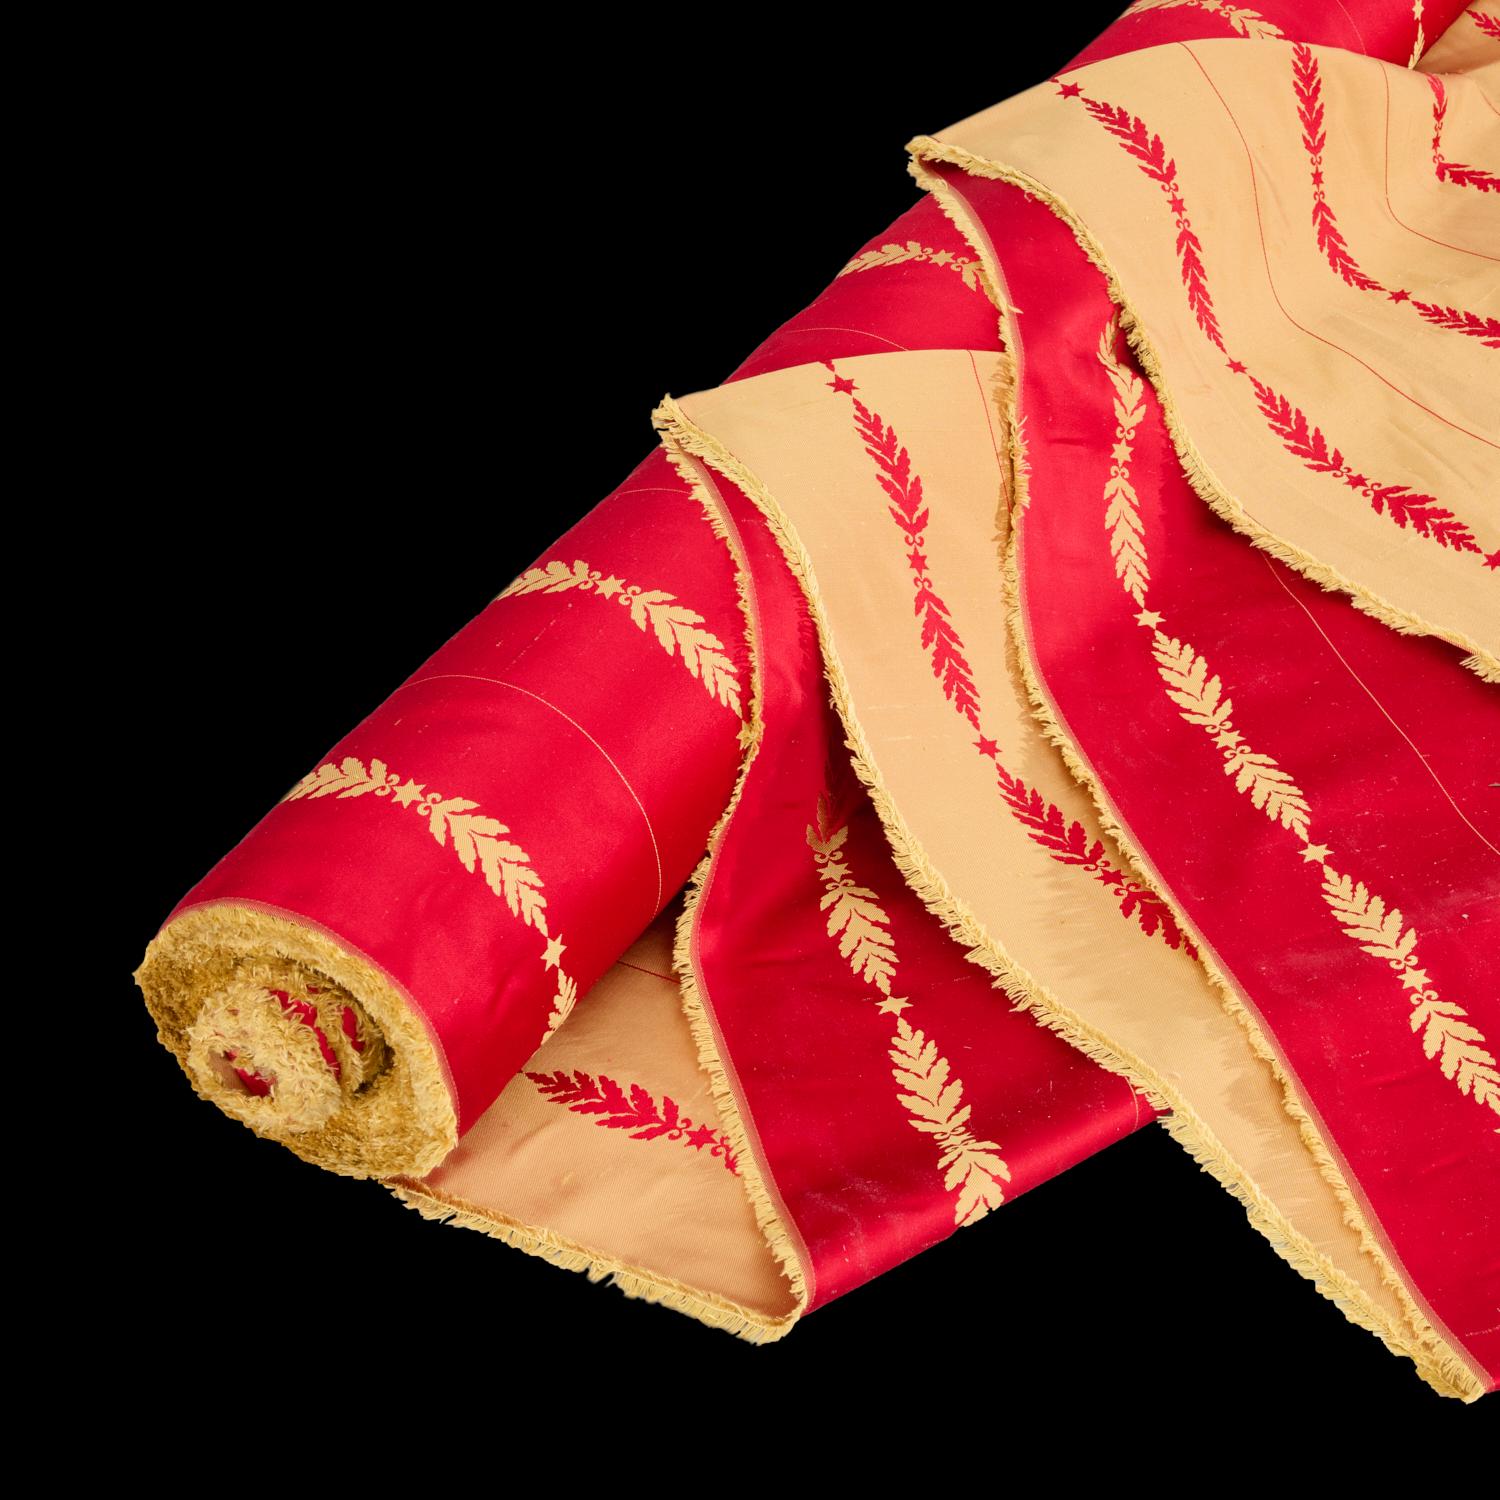 20th century, 45 Yards (approx) of Brunschwig and Fils reversible cherry red silk satin with gold foliate stripe design. This fabric was designed and woven exclusively for the Clinton White House during the refurbishment of the Cross Hall and Stair.